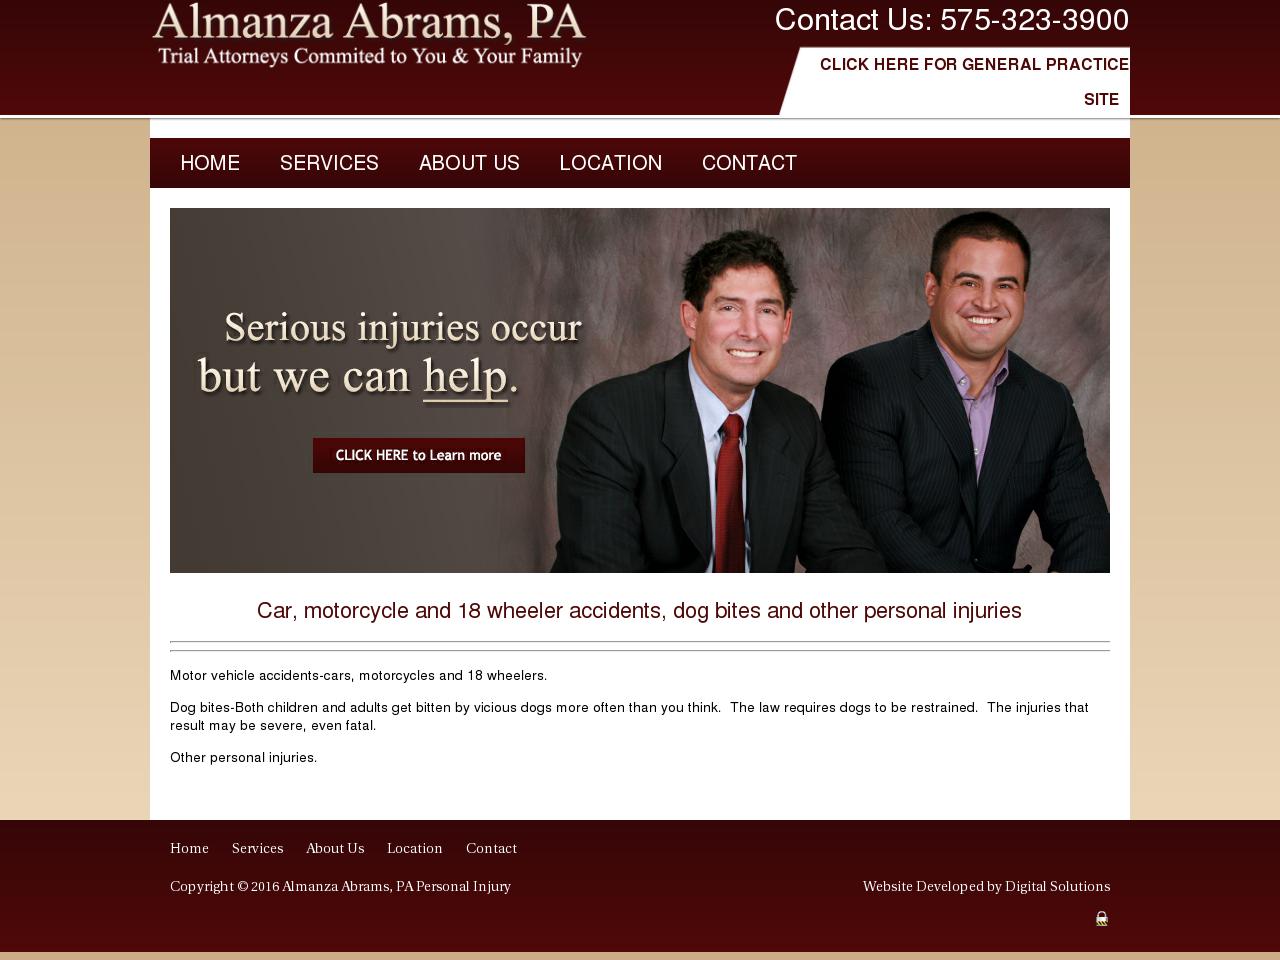 Lilley & O'Connell PA - Las Cruces NM Lawyers